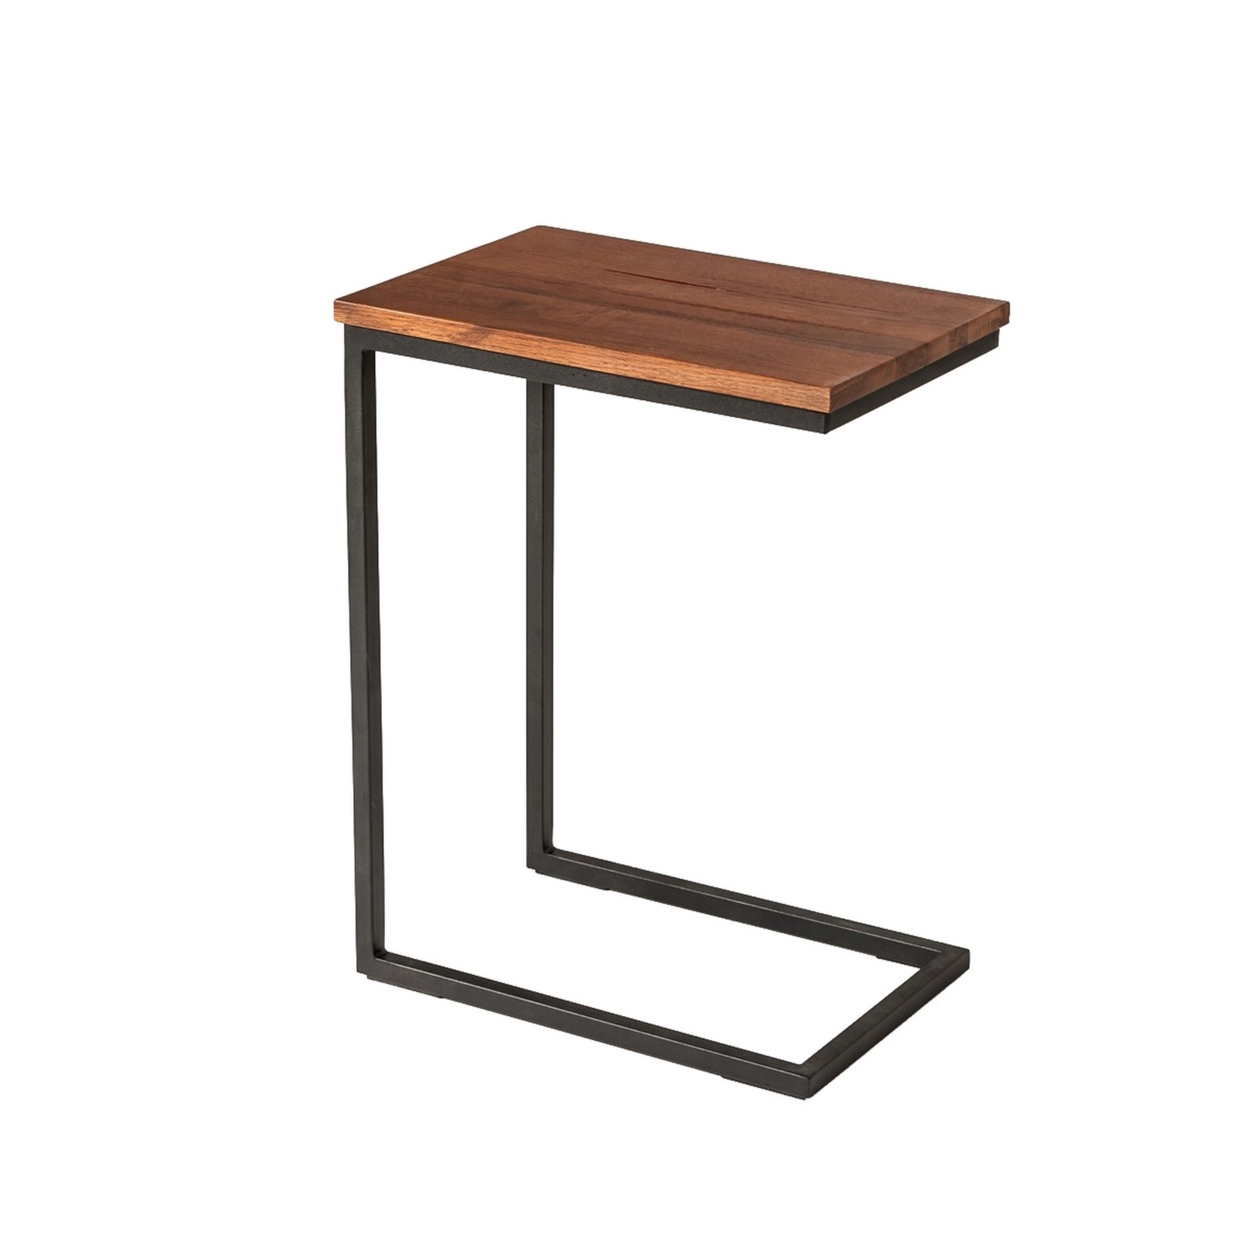 C Shaped End Table With Rectangular Wood Top, Brown And Black- Saltoro Sherpi